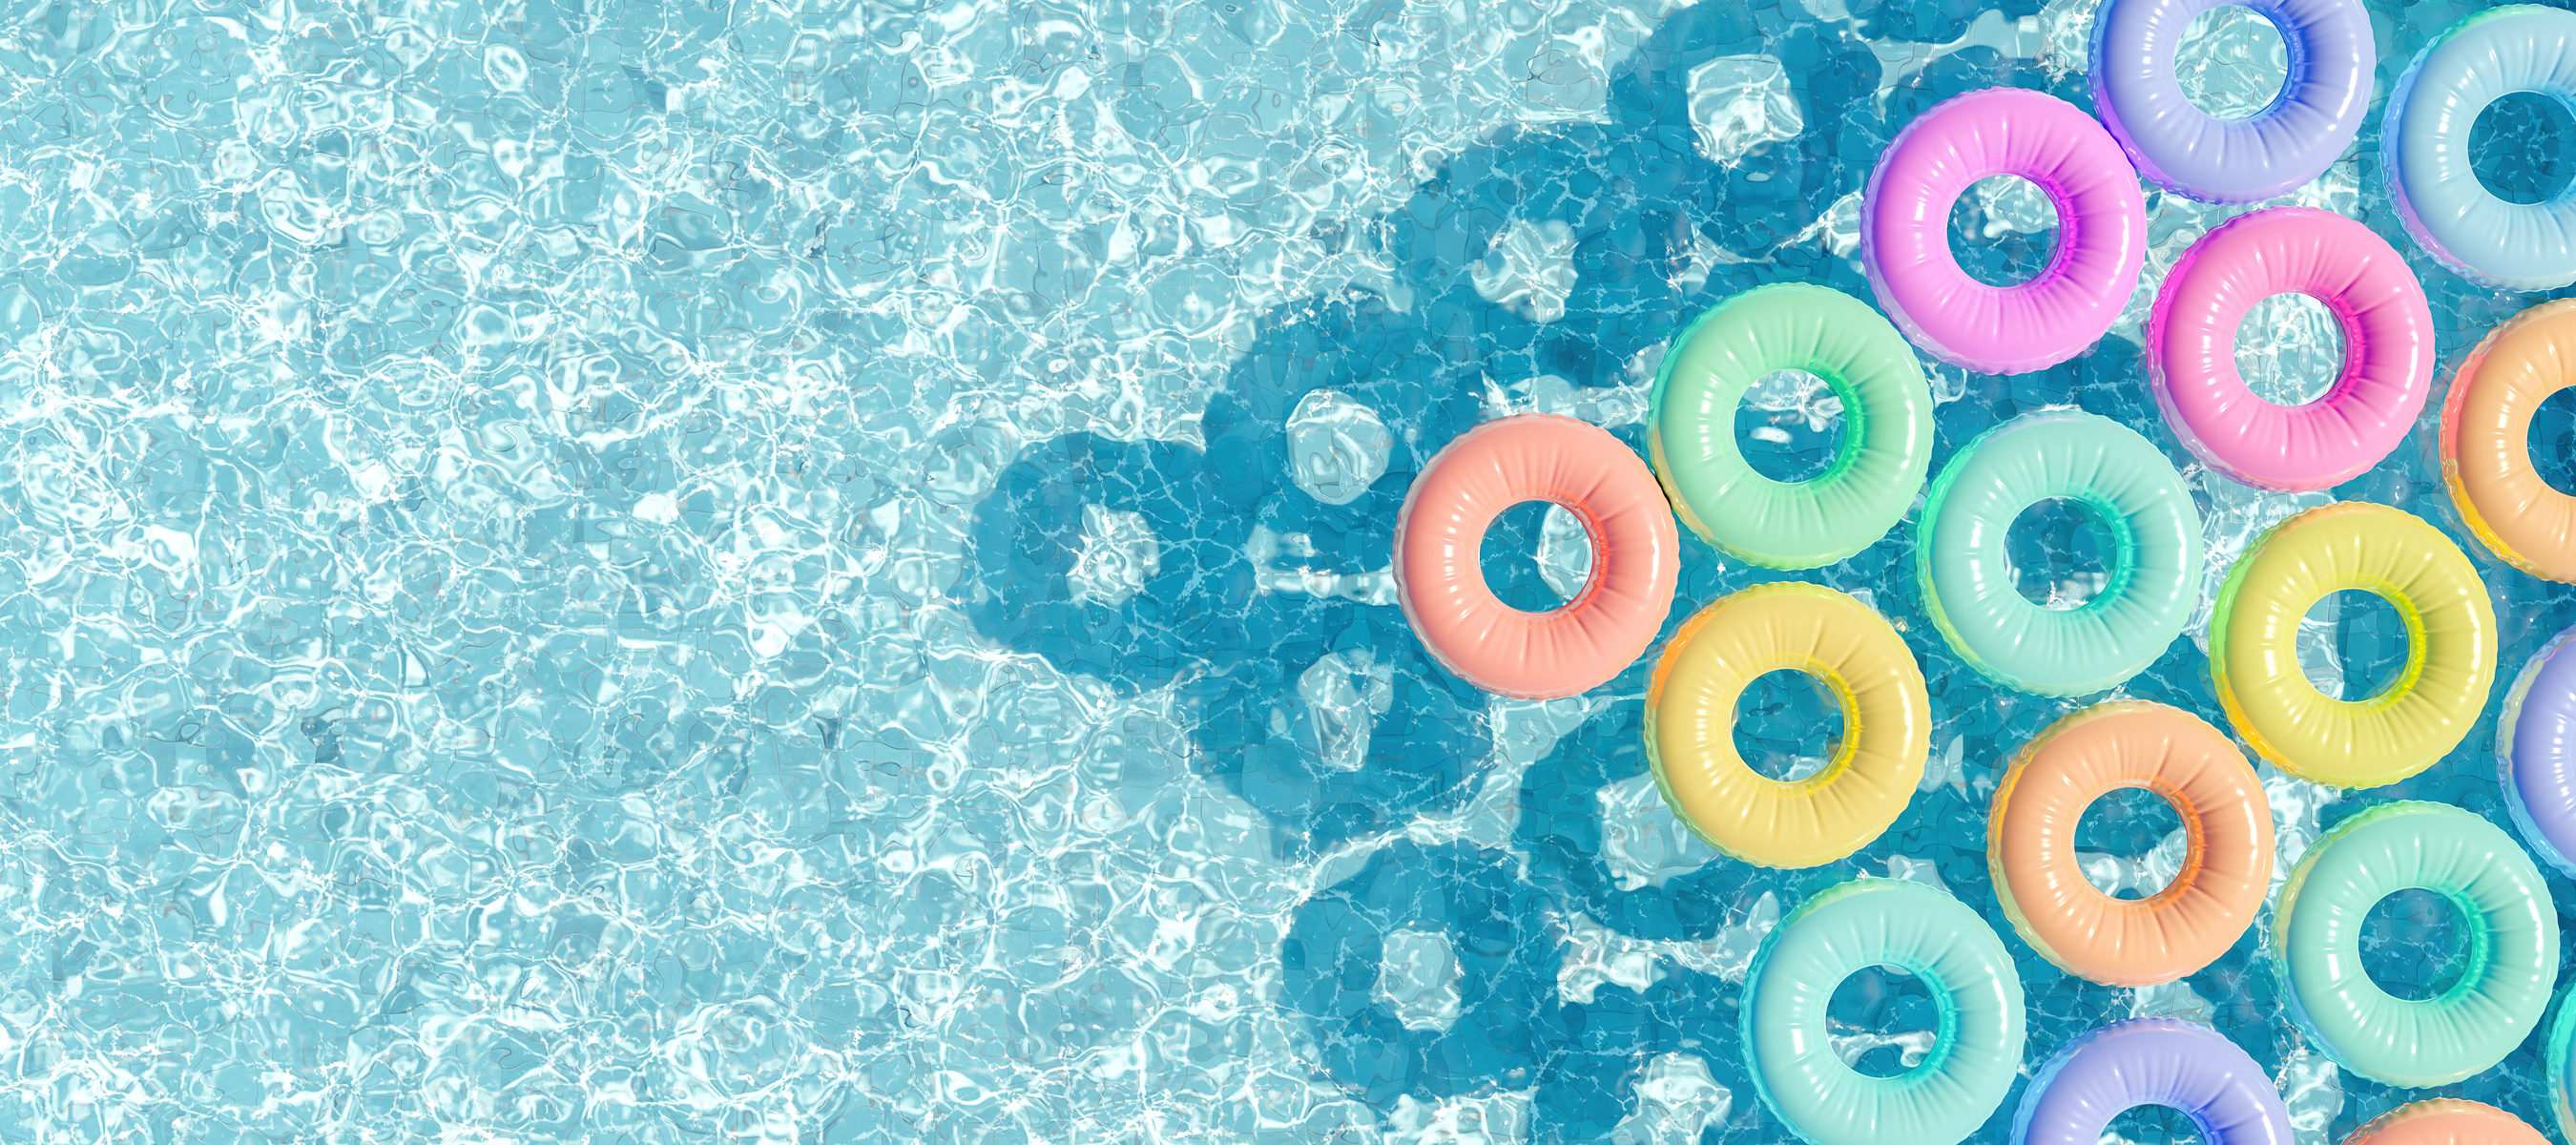 Colorful Round Pool Floats in a Swimming Pool